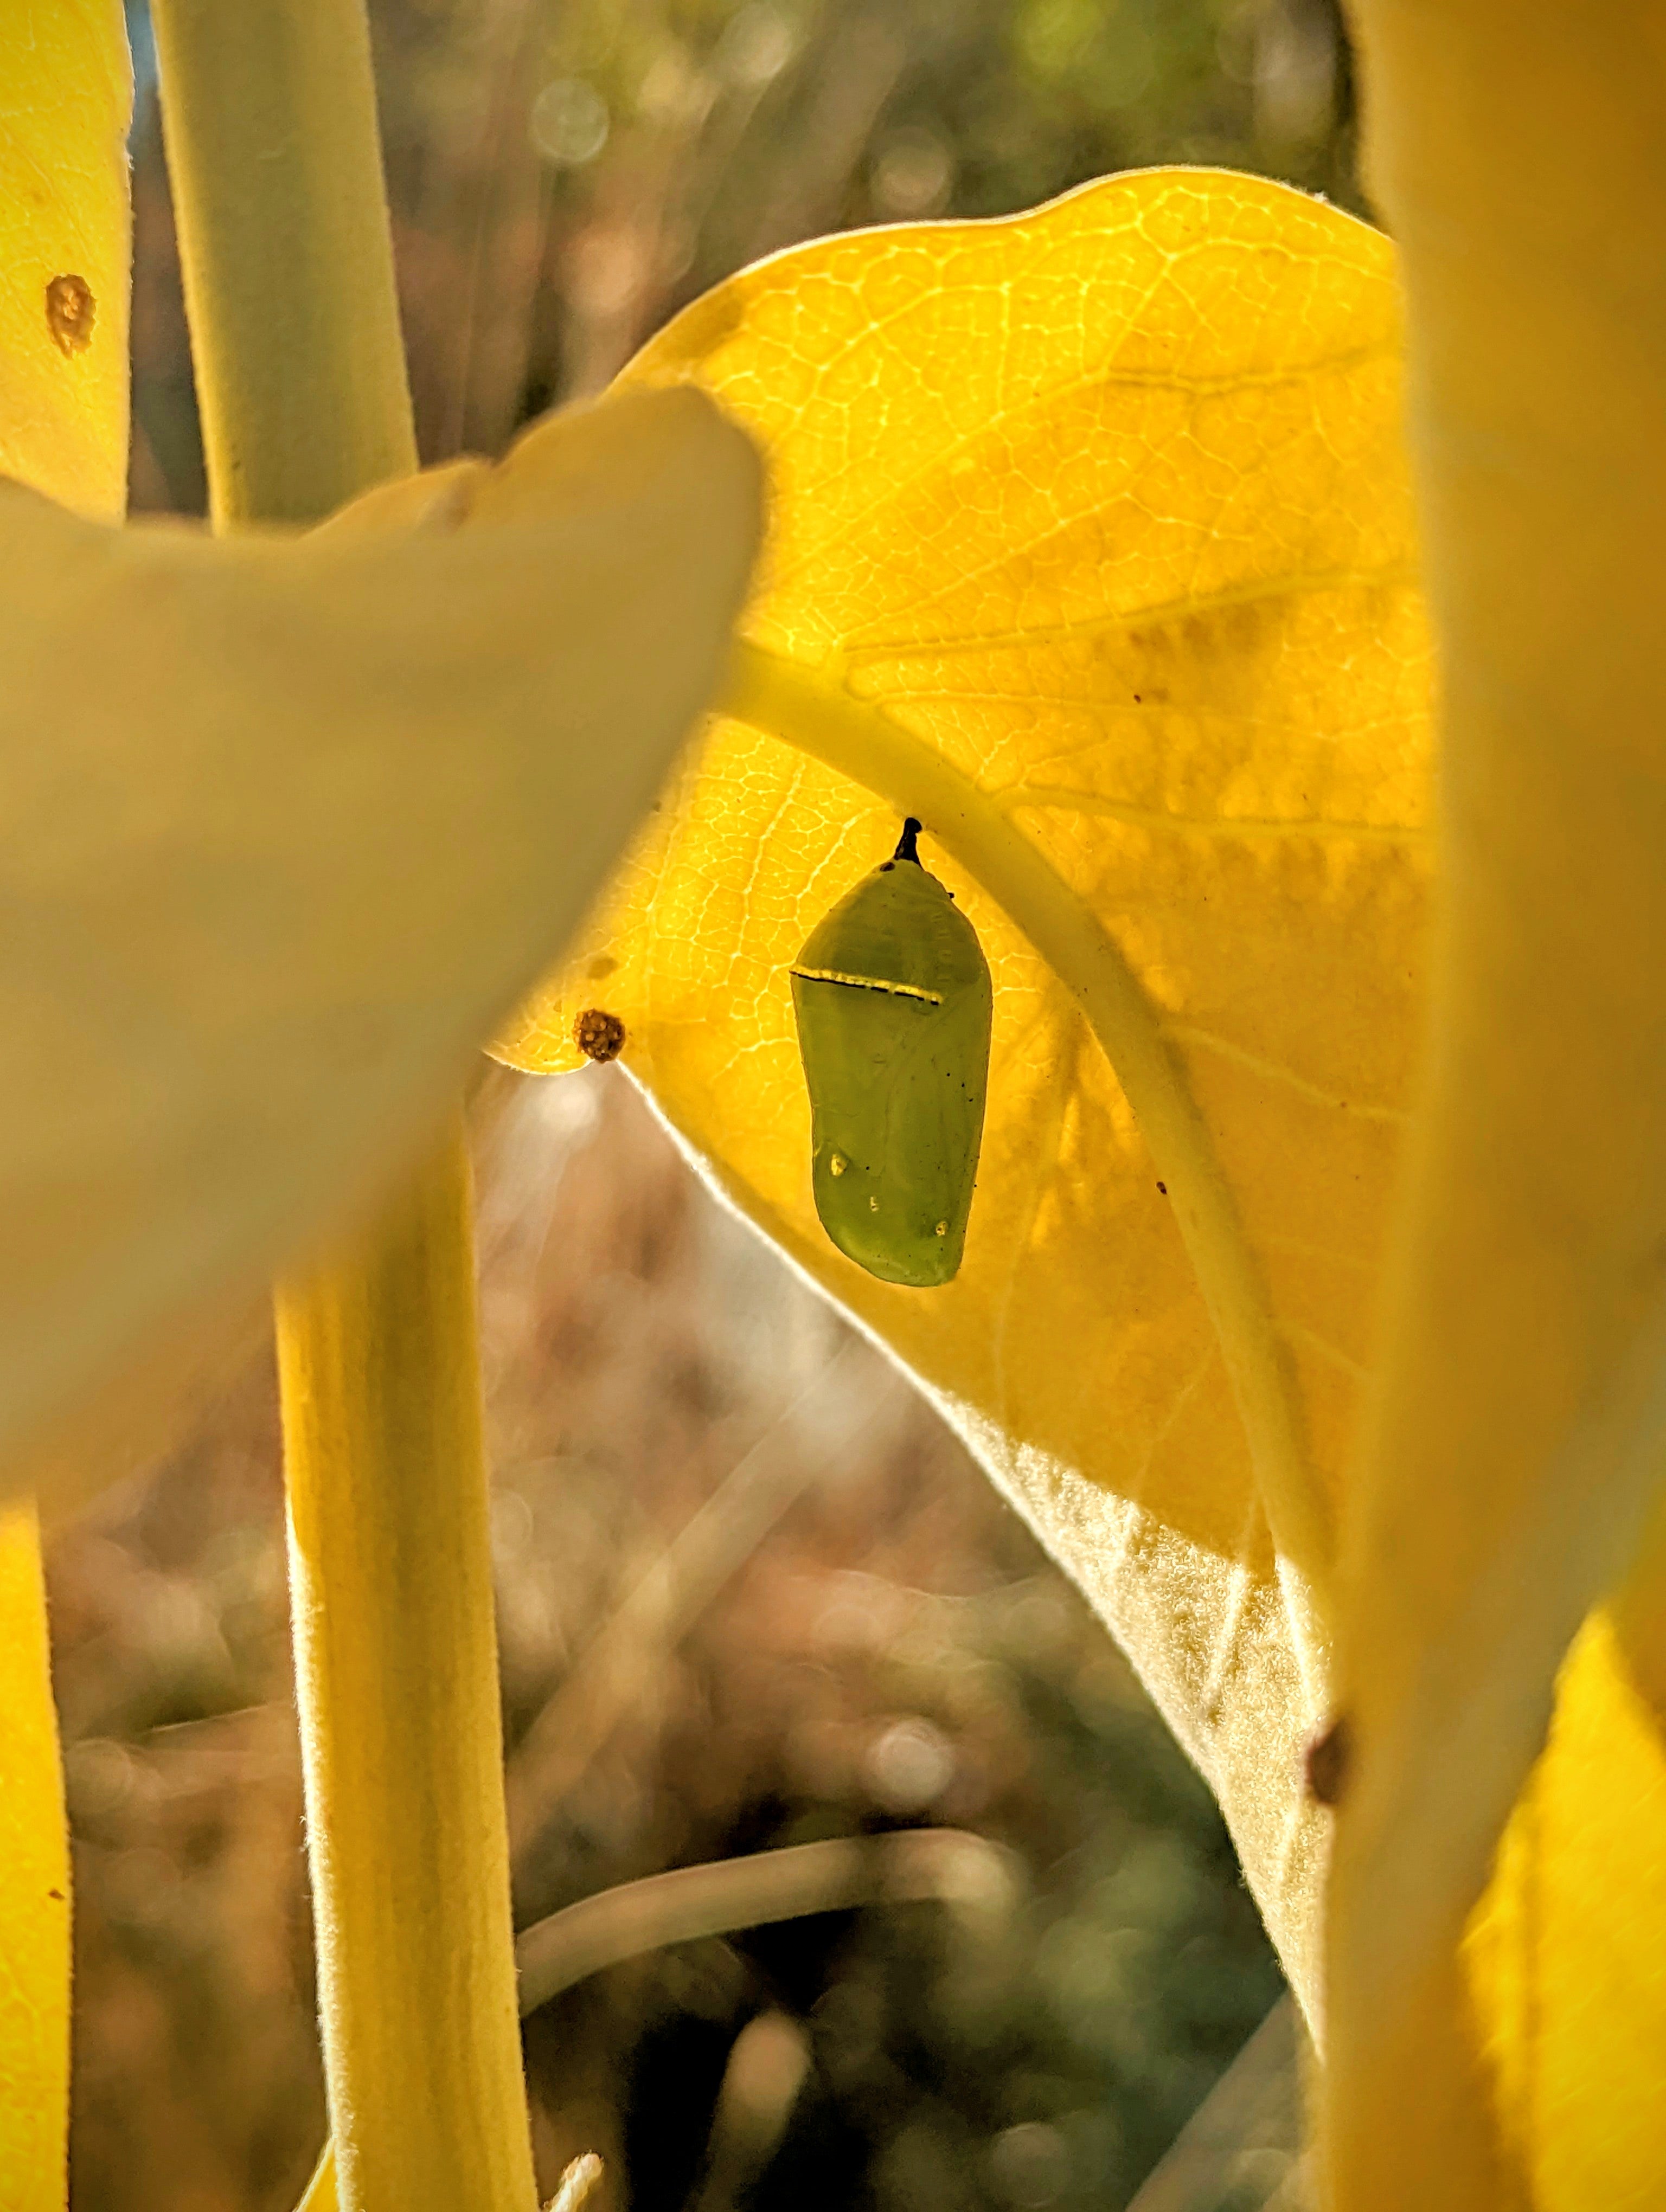 a green chrysalis hangs from the bottom of a leaf, contrasting strongly with the bright yellow leaf that is glowing, backlit by the sun